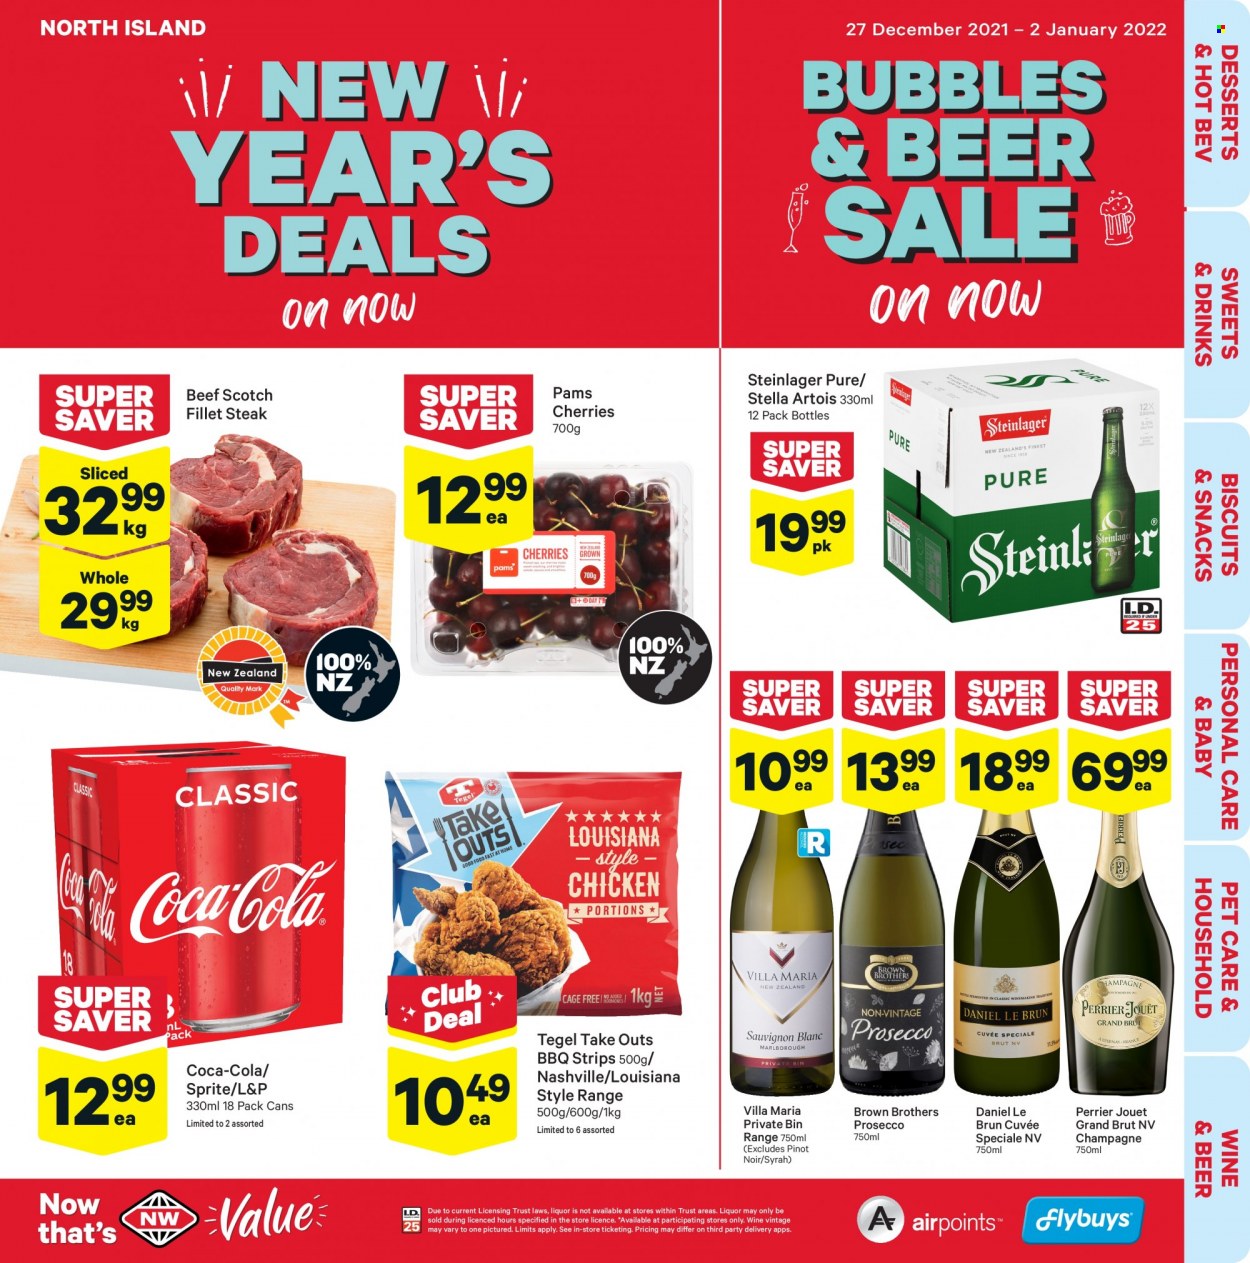 thumbnail - New World mailer - 27.12.2021 - 02.01.2022 - Sales products - cherries, strips, snack, biscuit, Coca-Cola, Sprite, L&P, Perrier, red wine, champagne, prosecco, wine, Pinot Noir, Cuvée, Daniel Le Brun, Syrah, BROTHERS, beer, Steinlager, steak, bin, Stella Artois. Page 1.